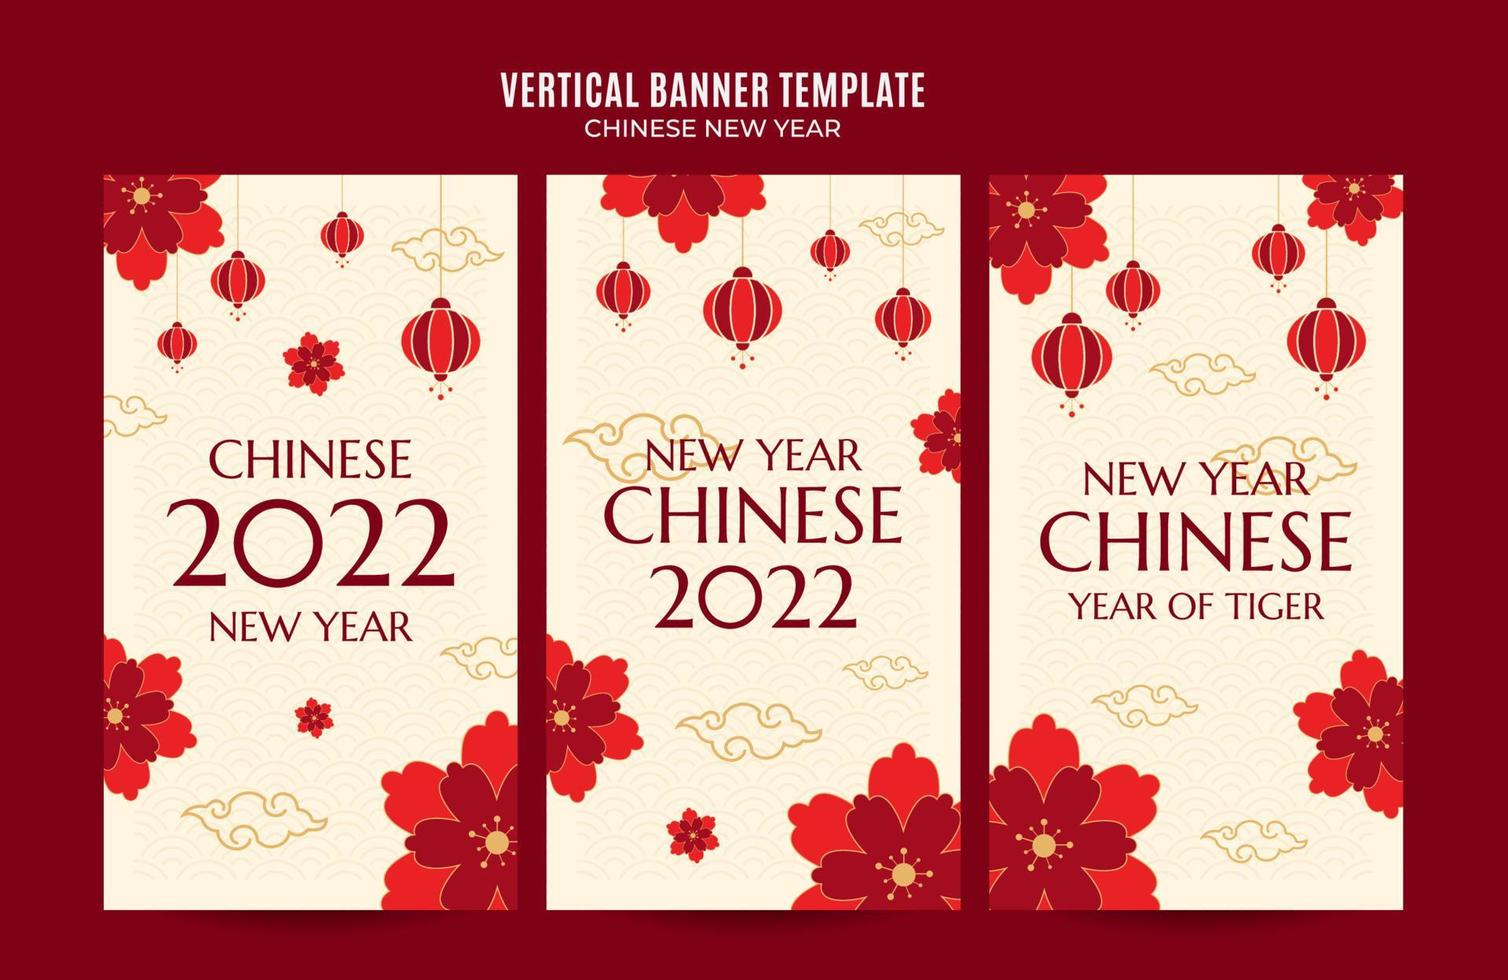 Vertical chinese new year 2022 web banner Instagram story template vector